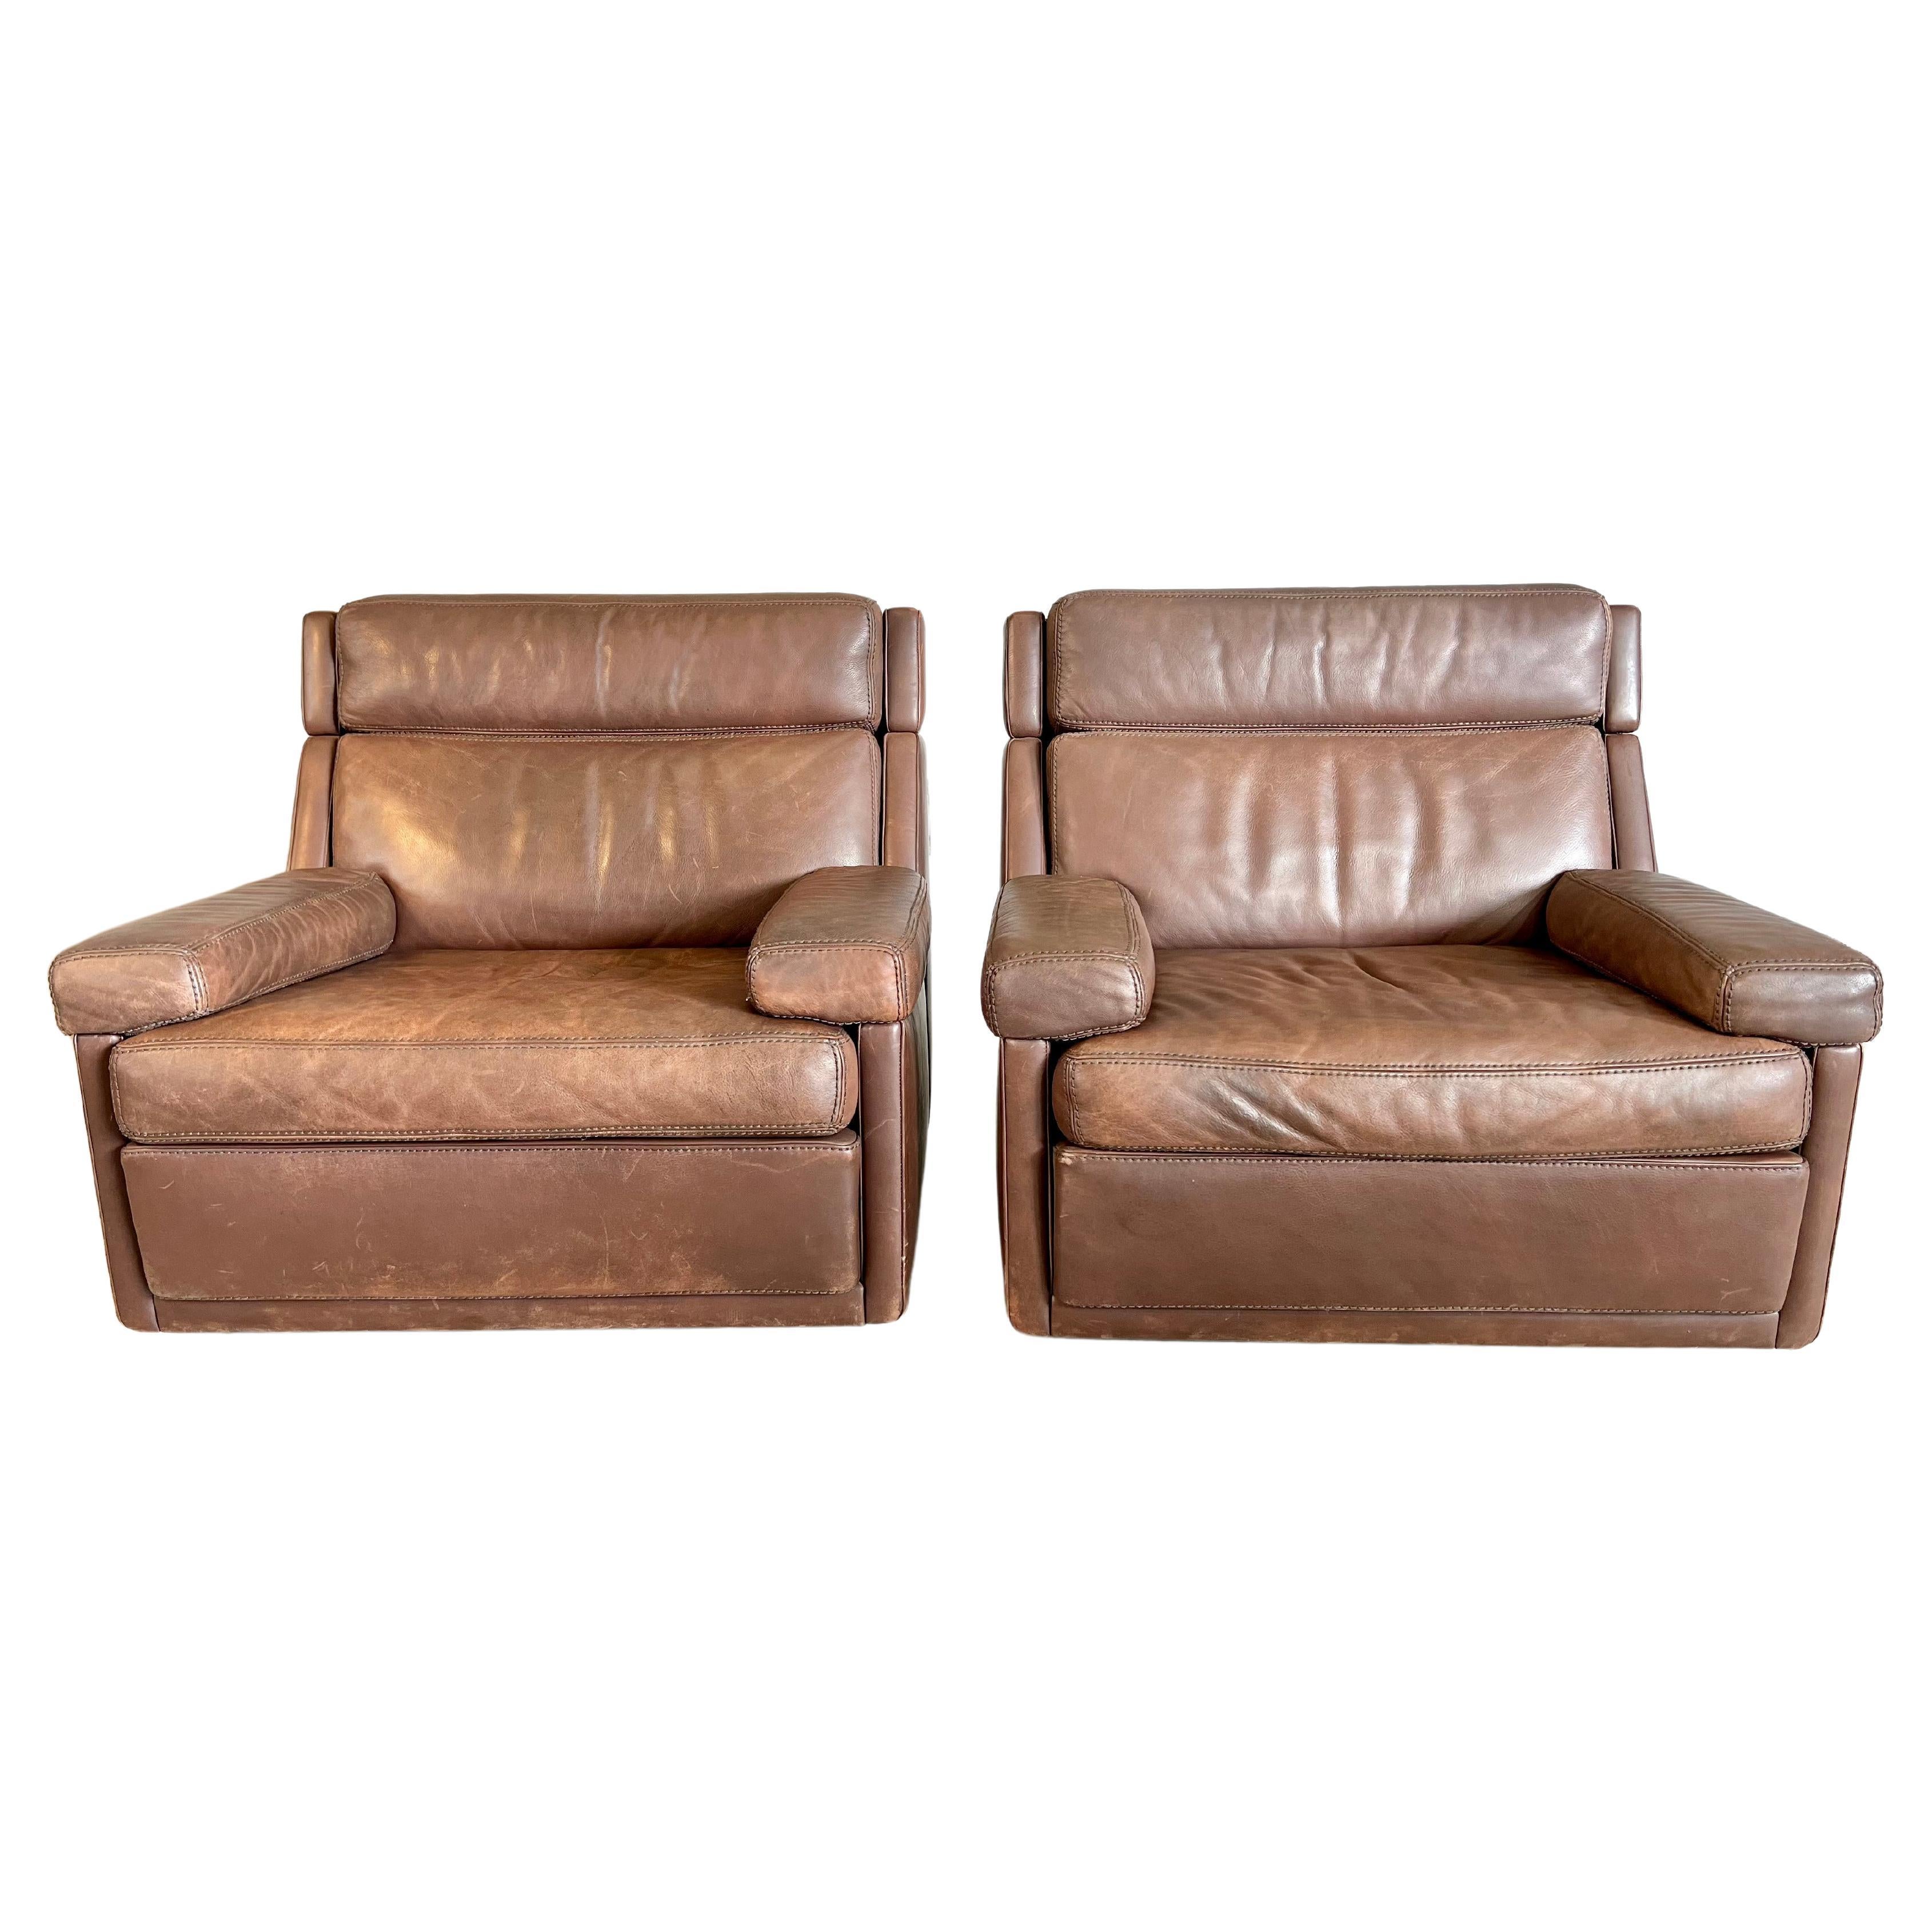 Original Vintage Modern Leather Armchairs by Durlet, Belgium, 1970s - a Pair For Sale